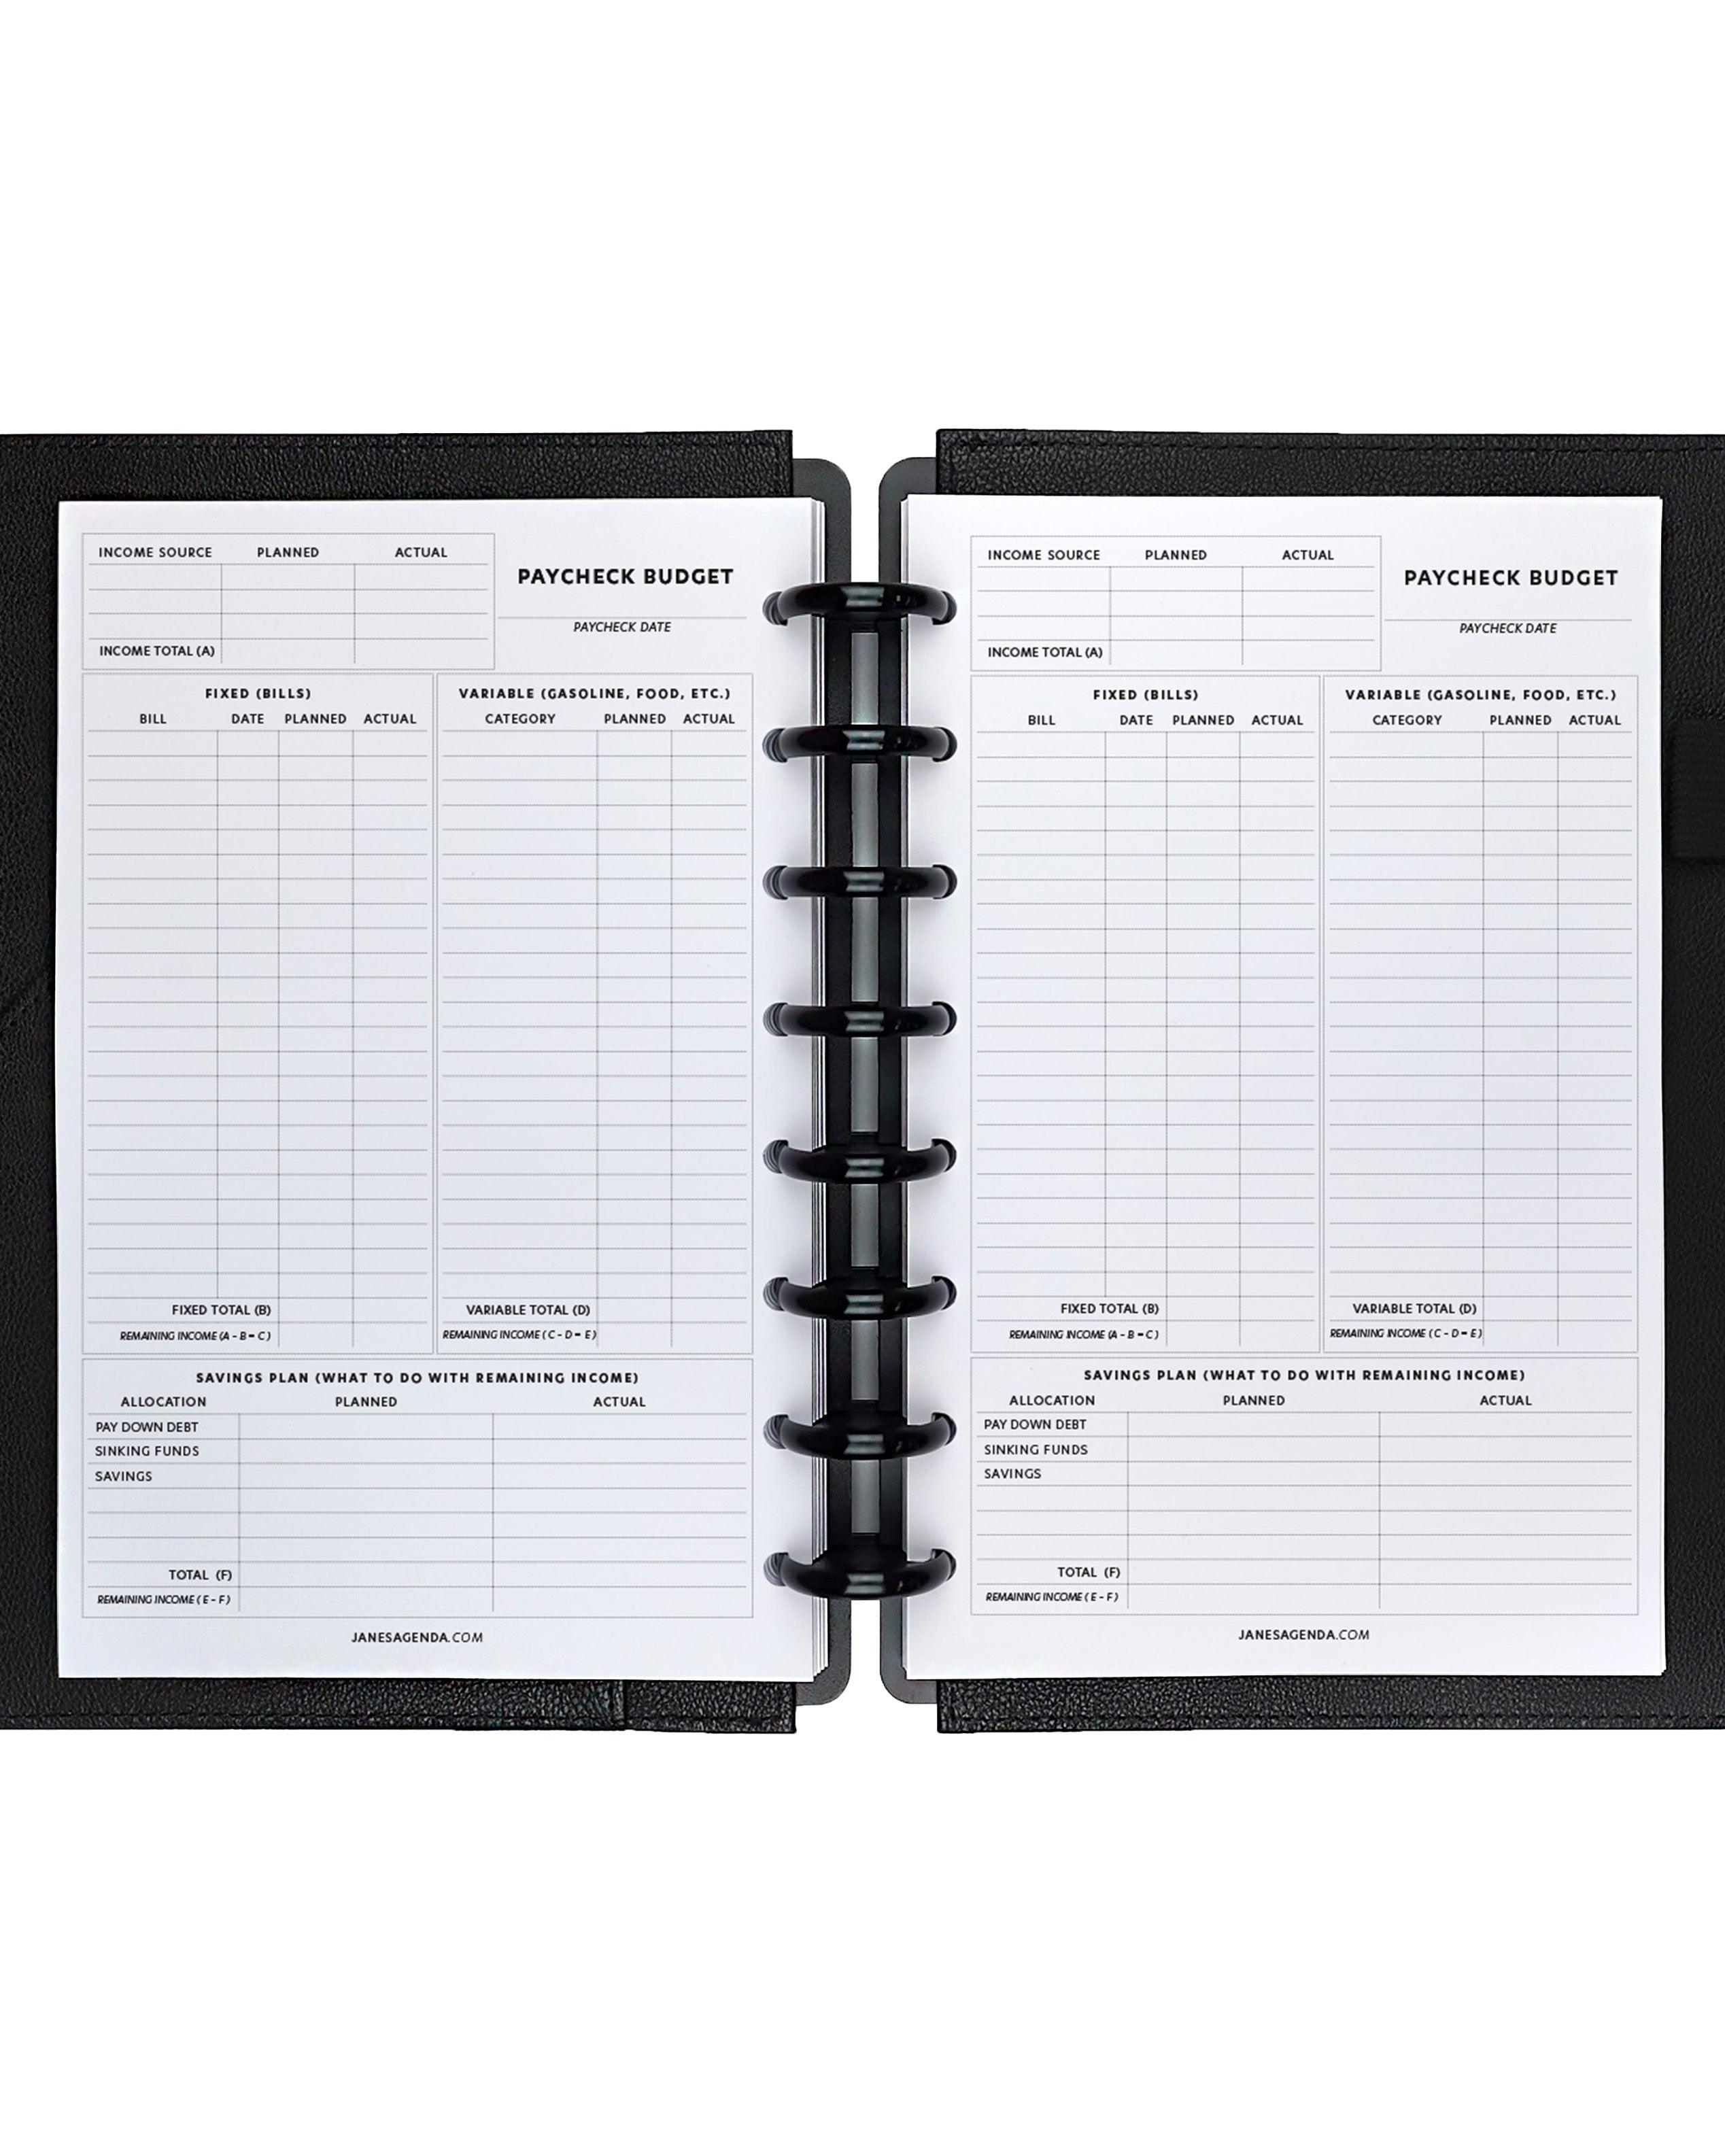 Paycheck budget planner inserts for discbound and six ring planner systems by Janes Agenda.